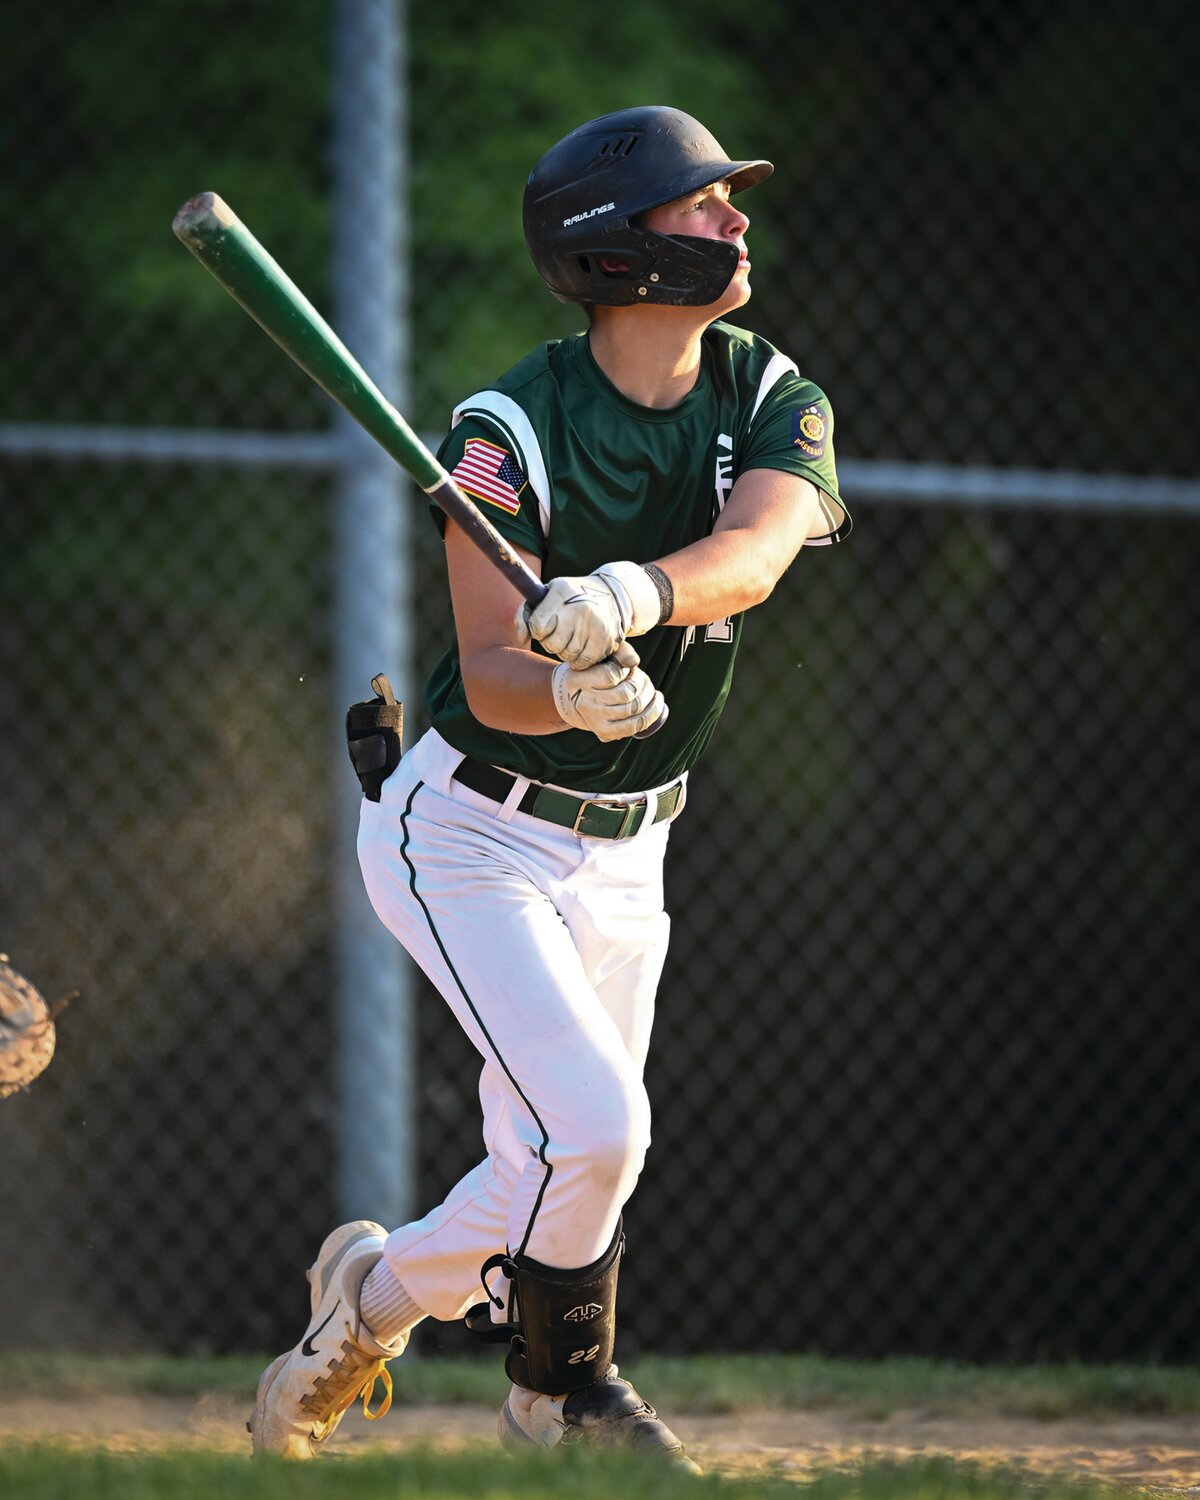 Pennridge’s Antonio Lillo watches his base hit in the second inning. Lillo went 2-for-3 with three RBIs to lead Pennridge.